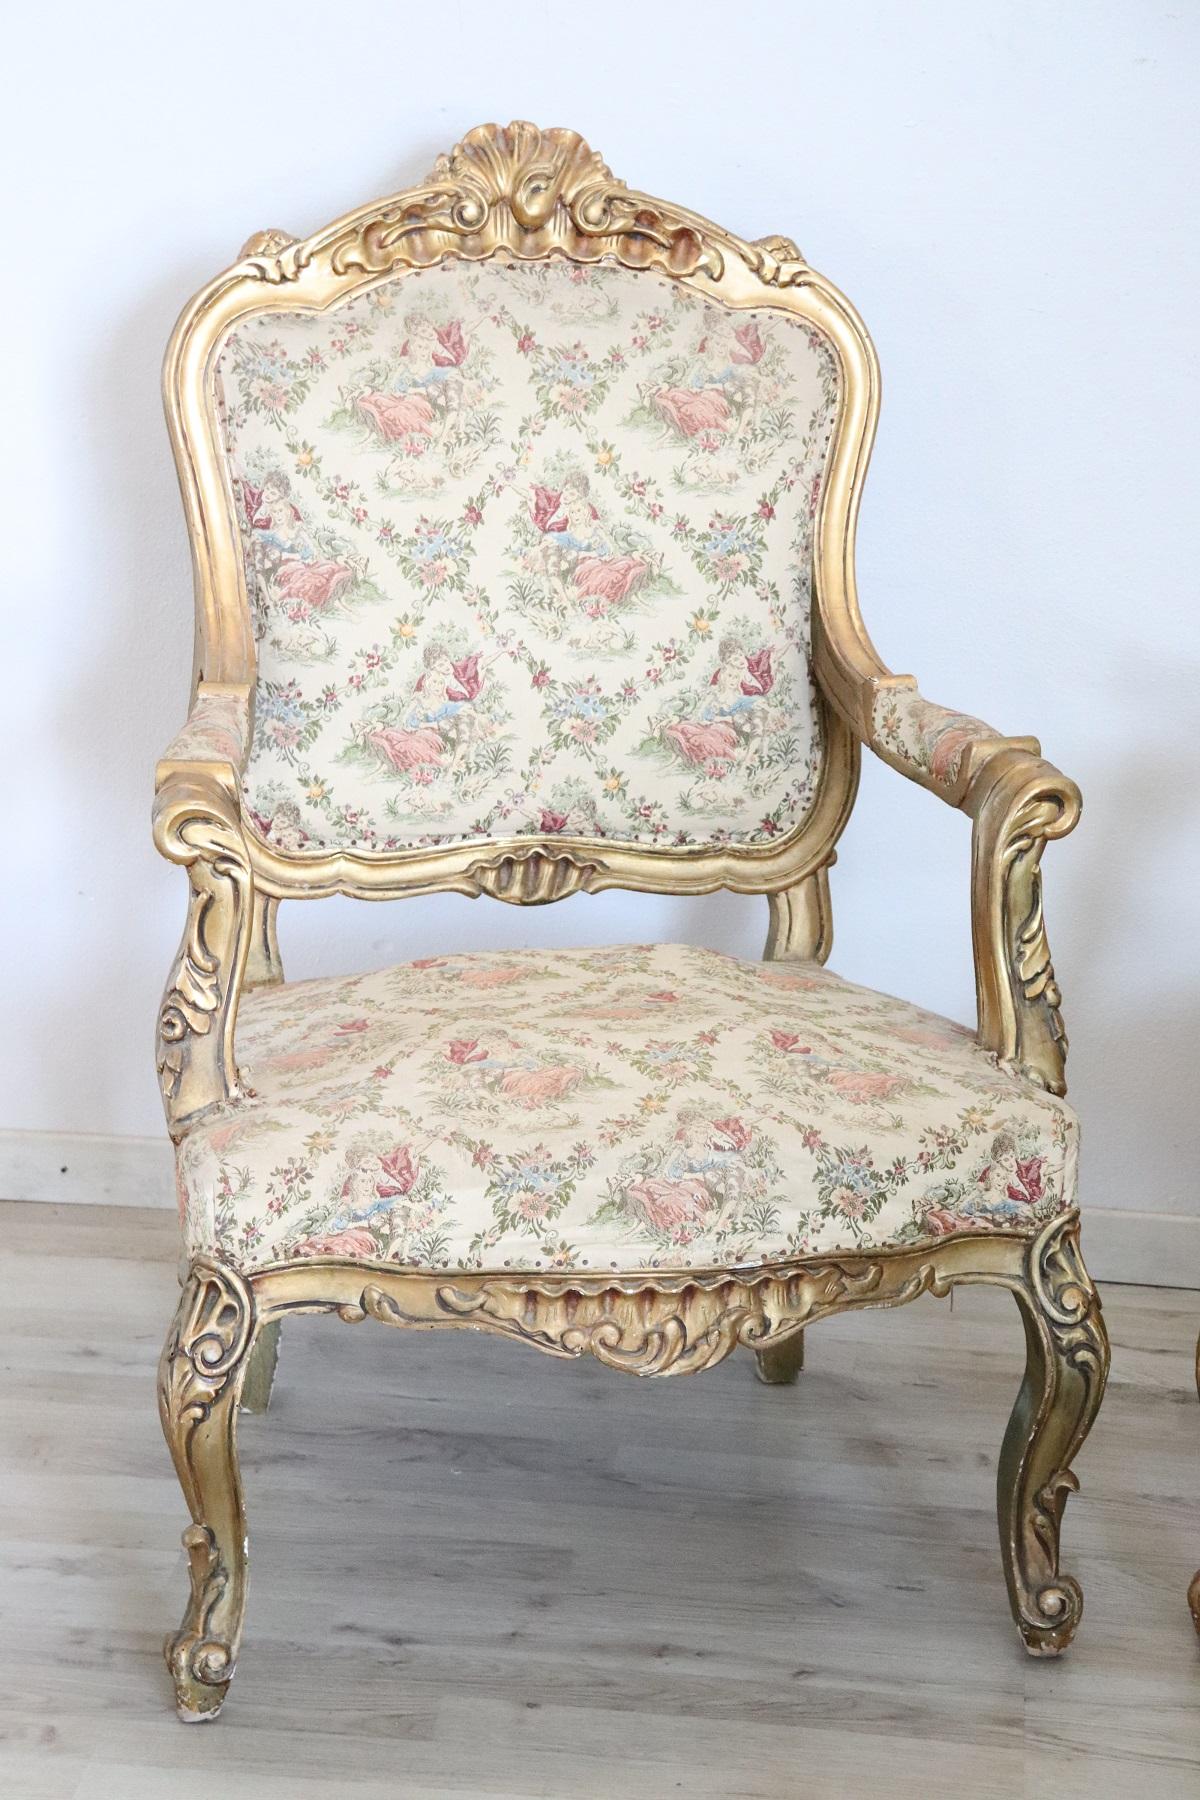 Rare complete Italian luxury Baroque style pair of armchairs in carved and gilded wood
The armchairs comes from an important Italian villa and embellished the hall dedicated to the reception of guests. Used conditions.
 